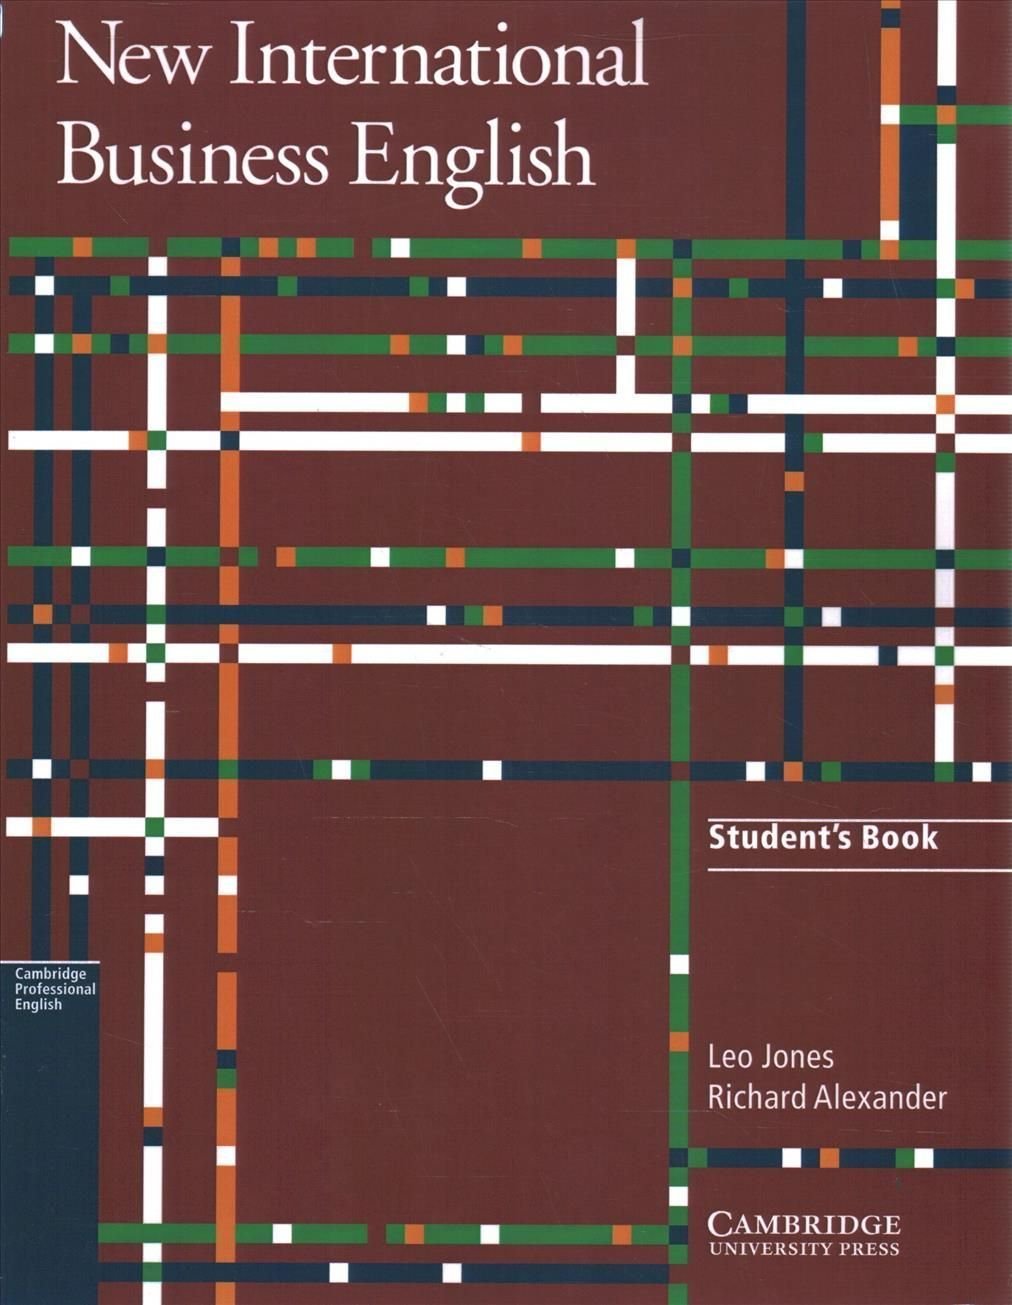 Delivery　Leo　Free　Buy　Business　Book　With　English　New　International　Jones　Student's　by